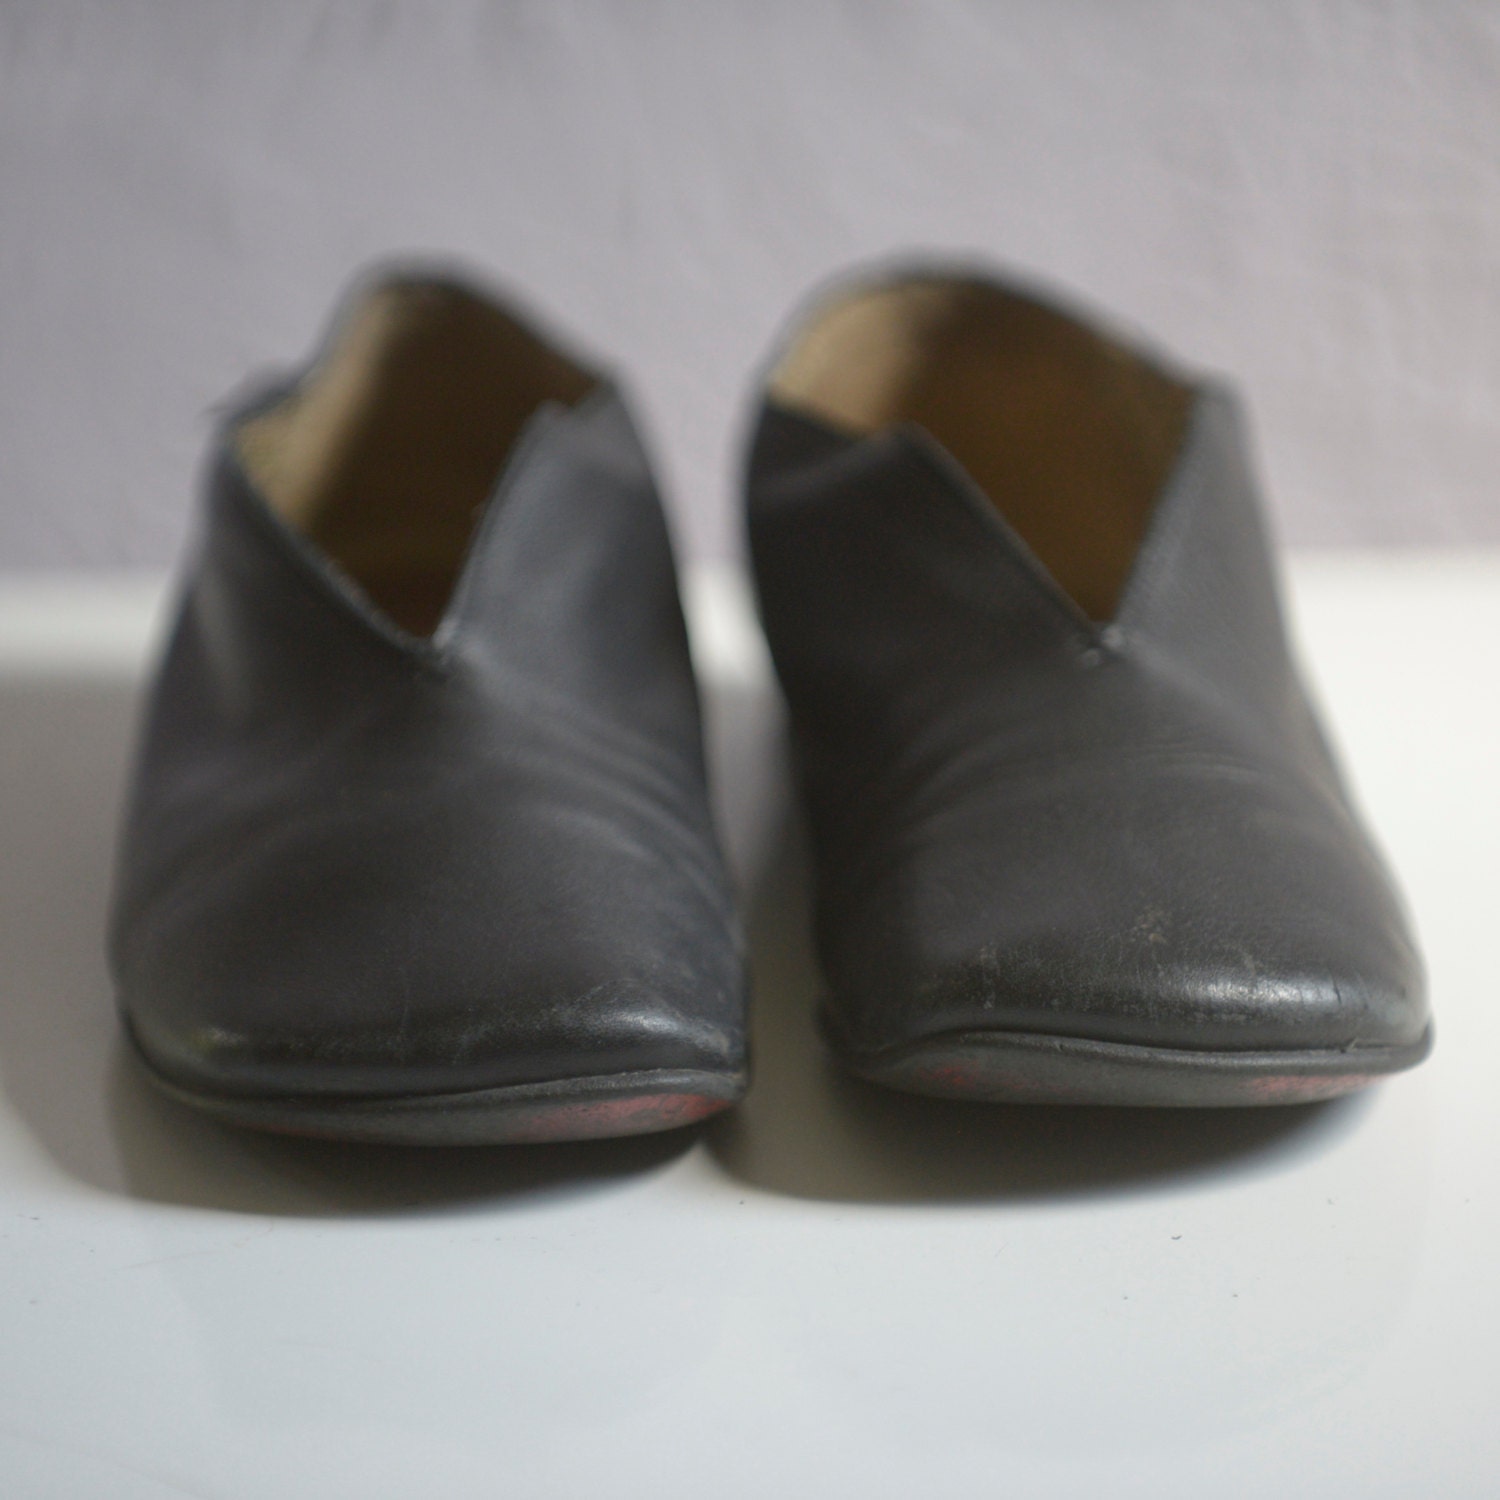 Vintage Camper Flat Euro Loafers Black Buttery by ClareFoxFinery